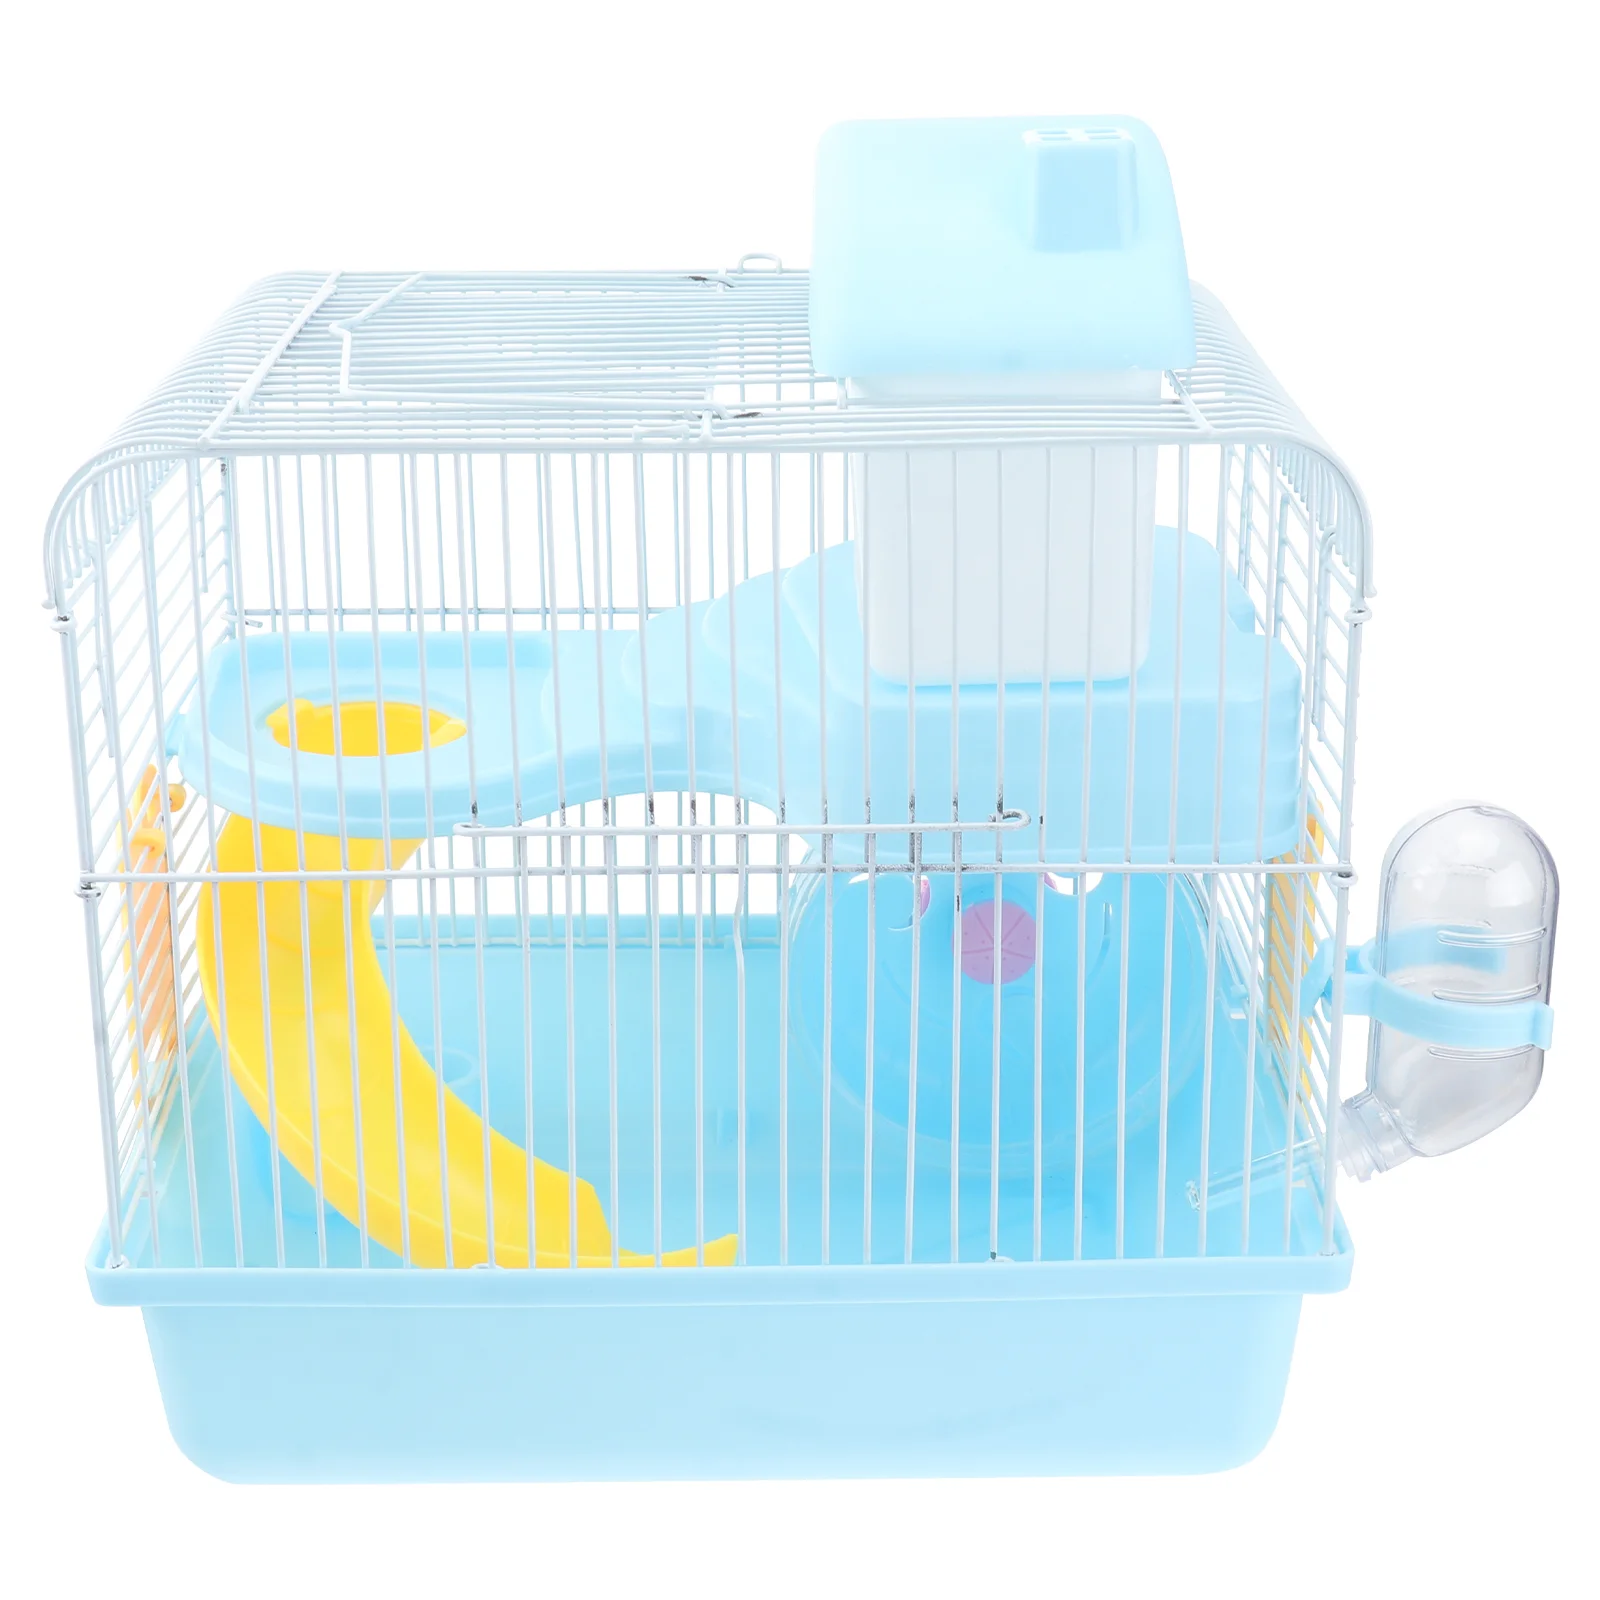 

Hamsater Castle Plastic Carafe Basic Cage Hamster Gerbils Ladders Toy Pet Carrier Small Animal Play House Dwarf Cages